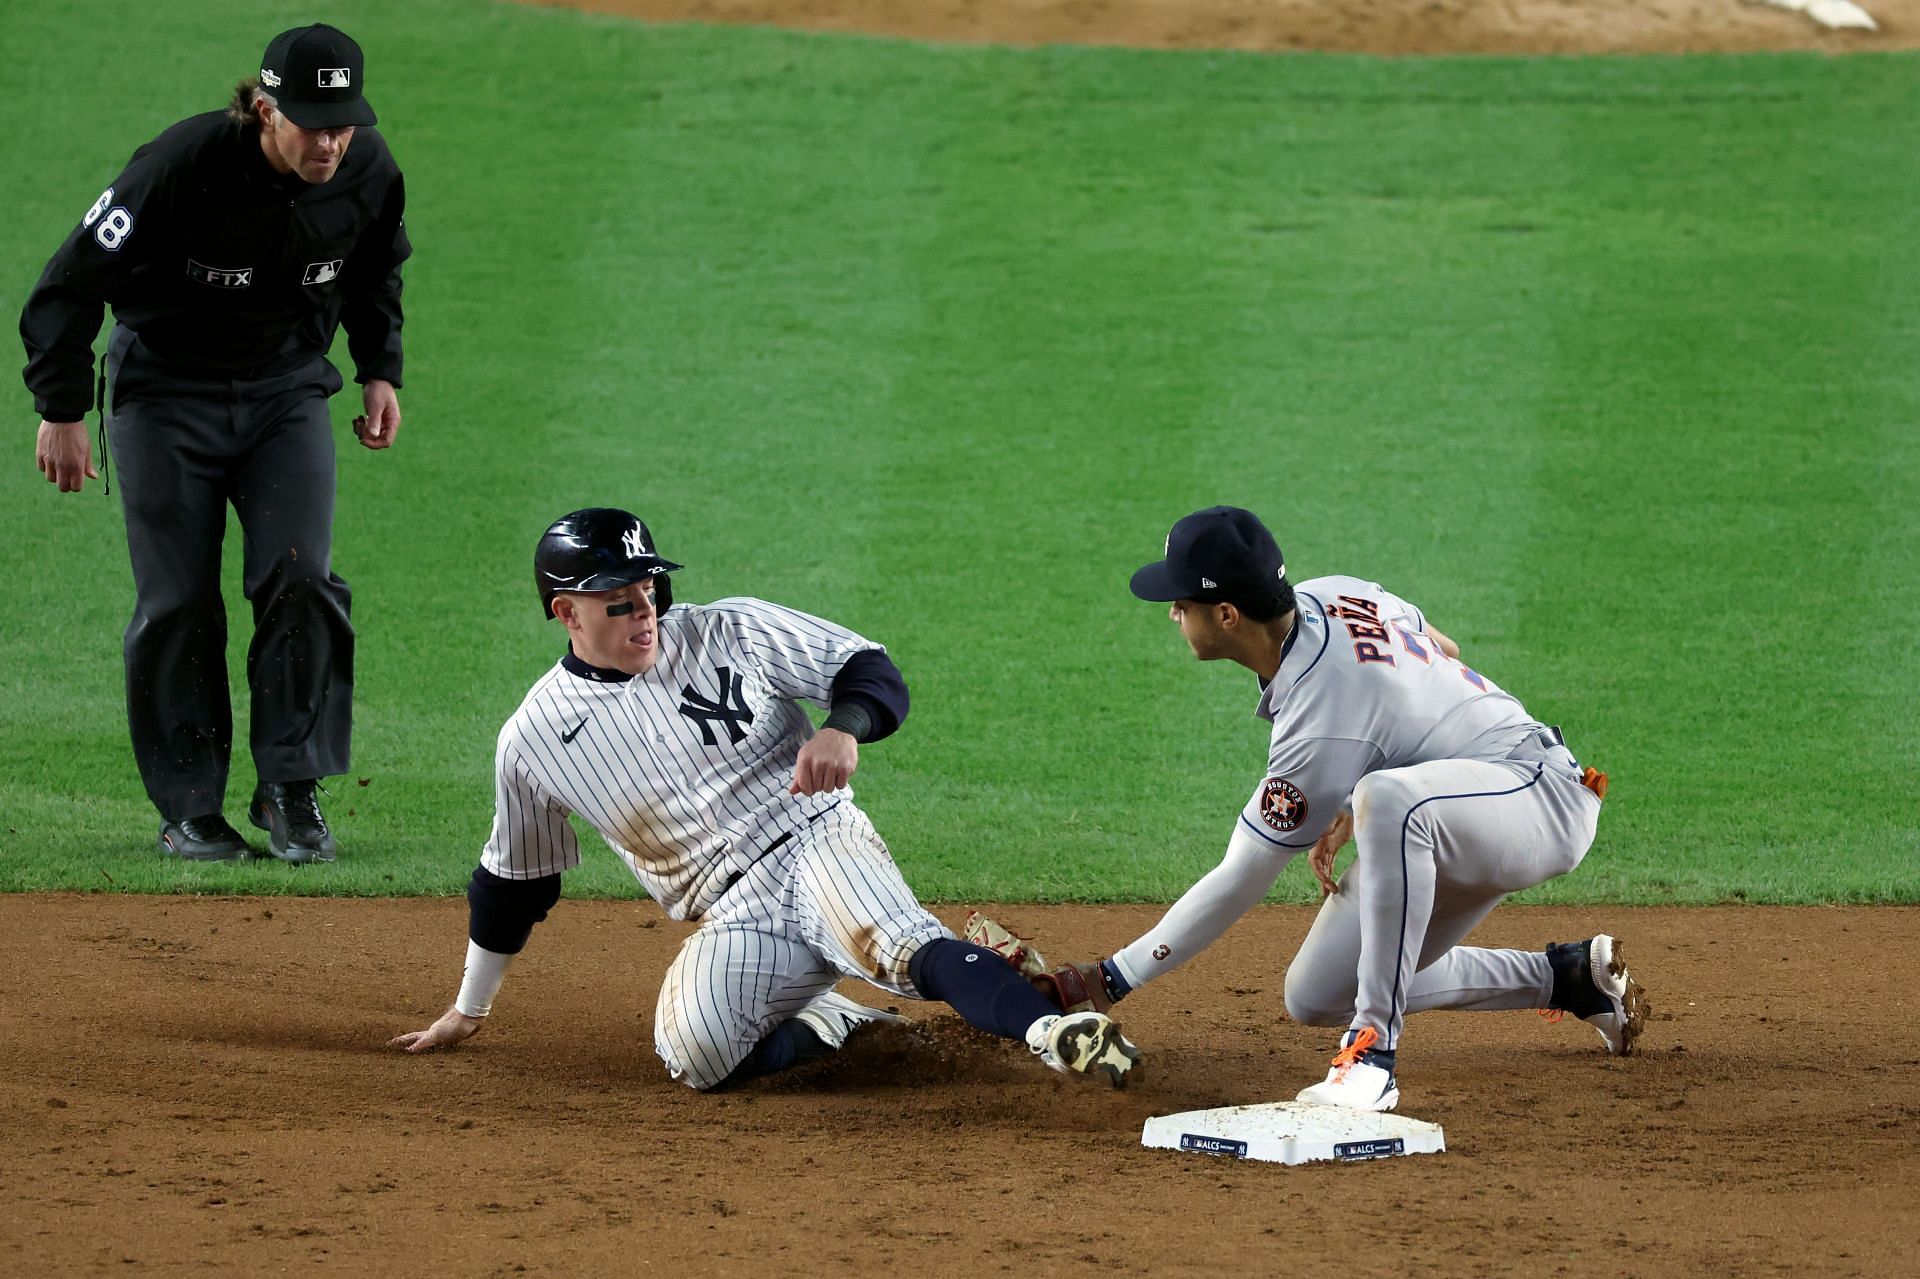 Stolen base attempts may go up with new bases